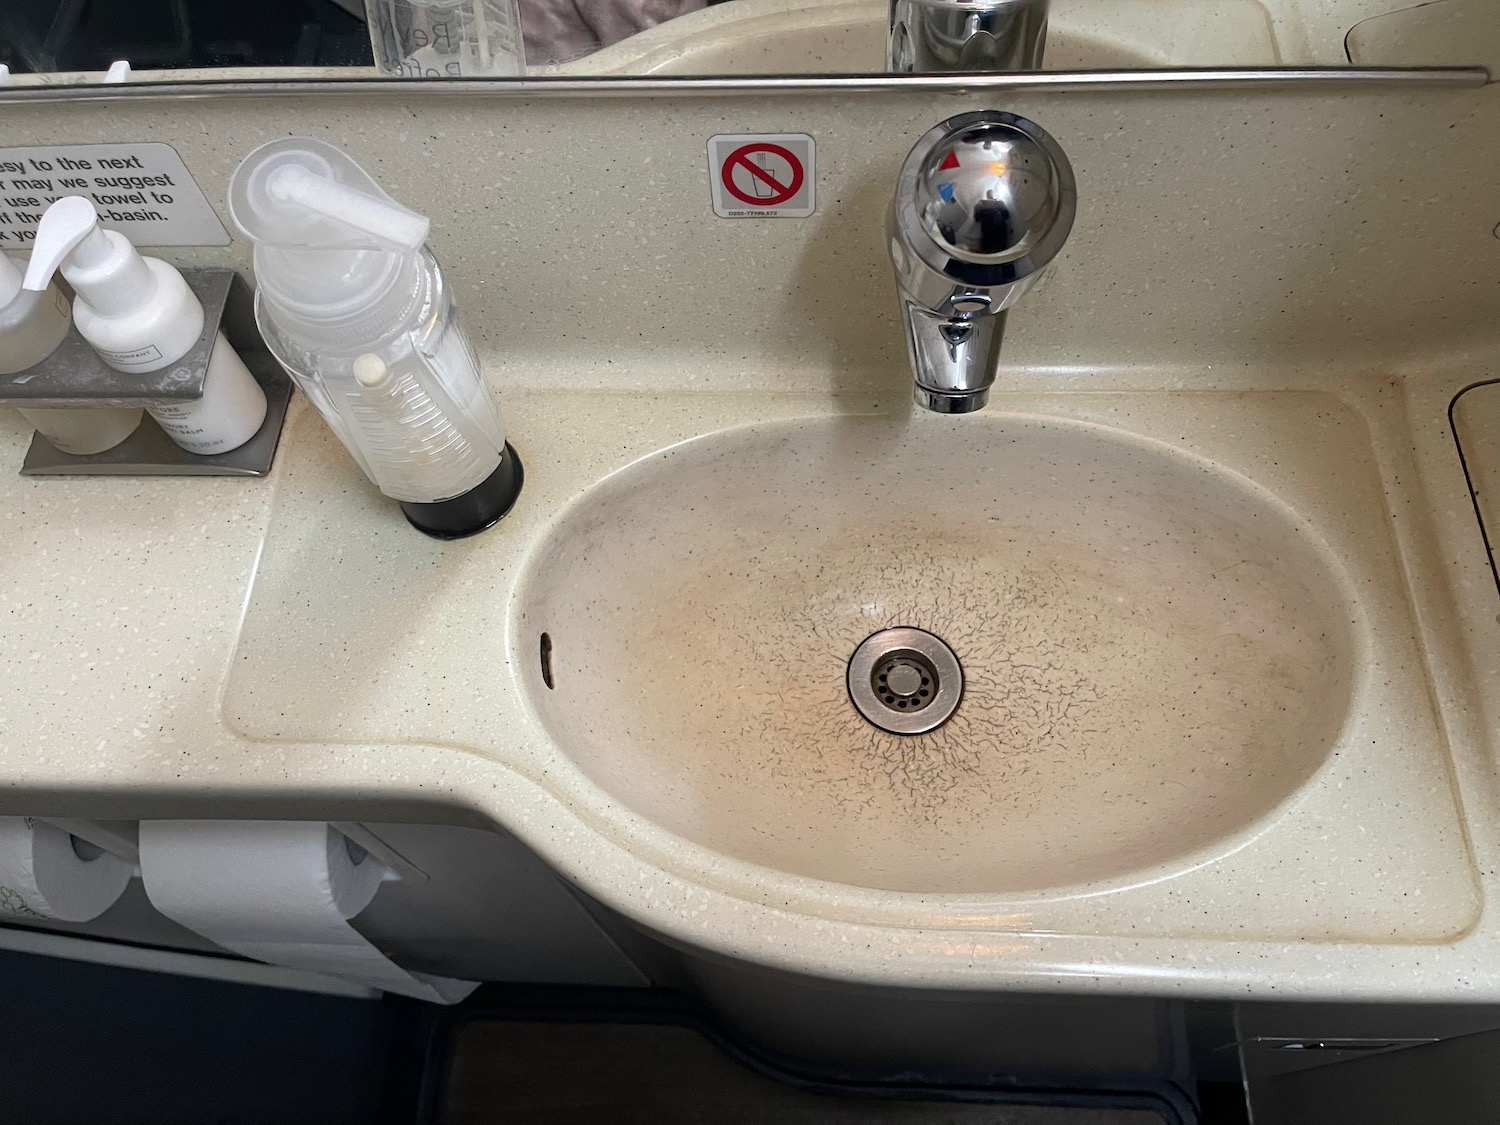 a sink with soap dispenser and soap dispenser